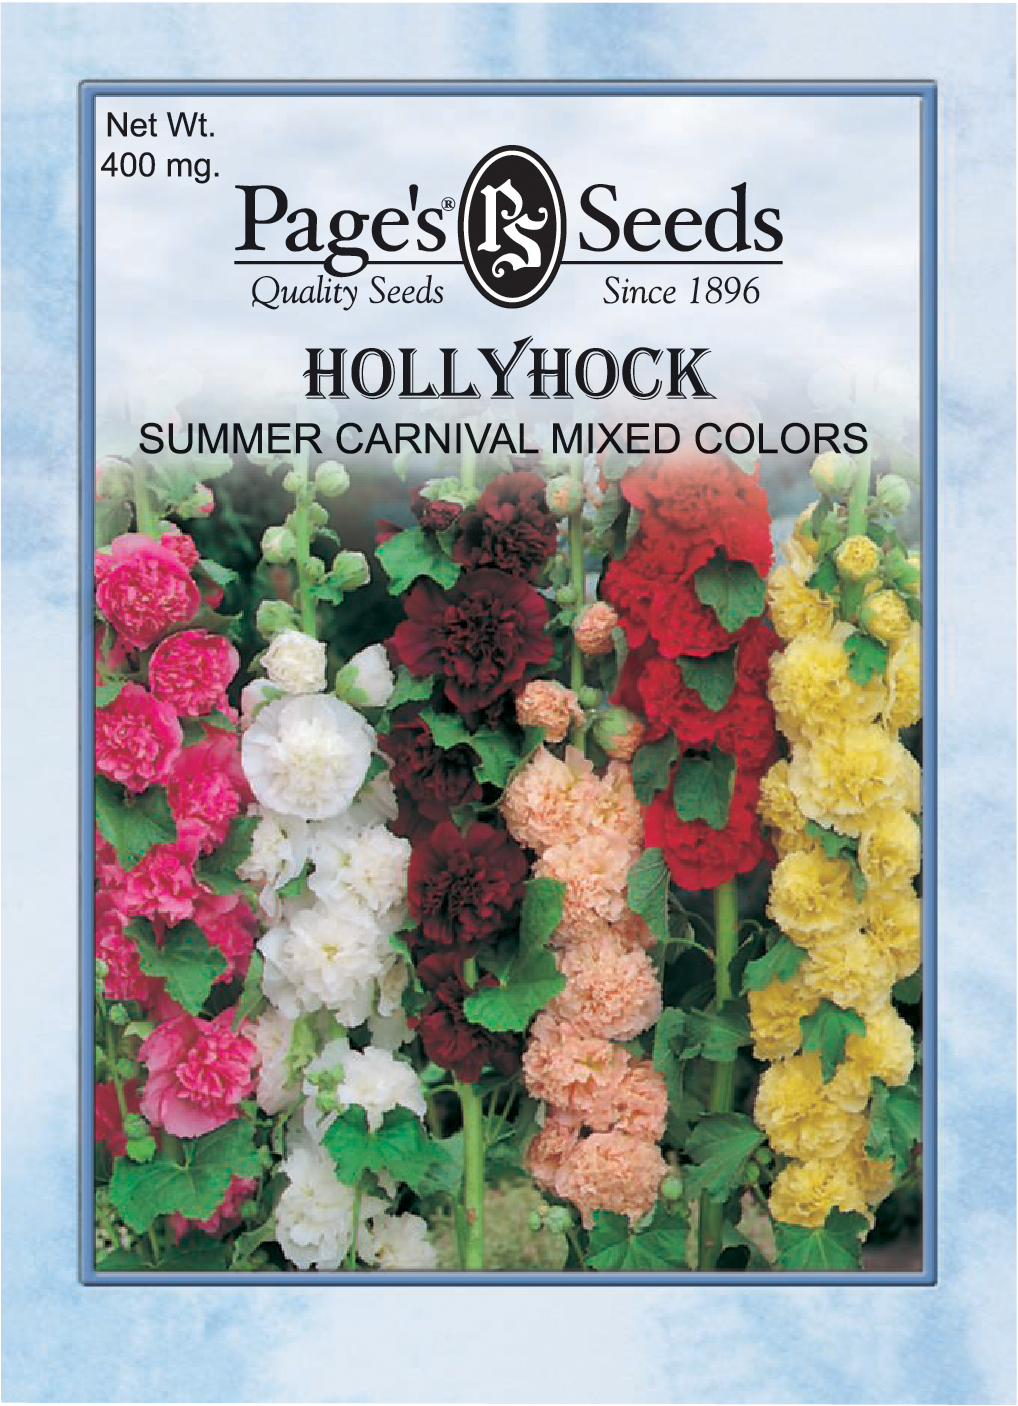 Summer Carnival Mixed Colors Hollyhock Seeds 